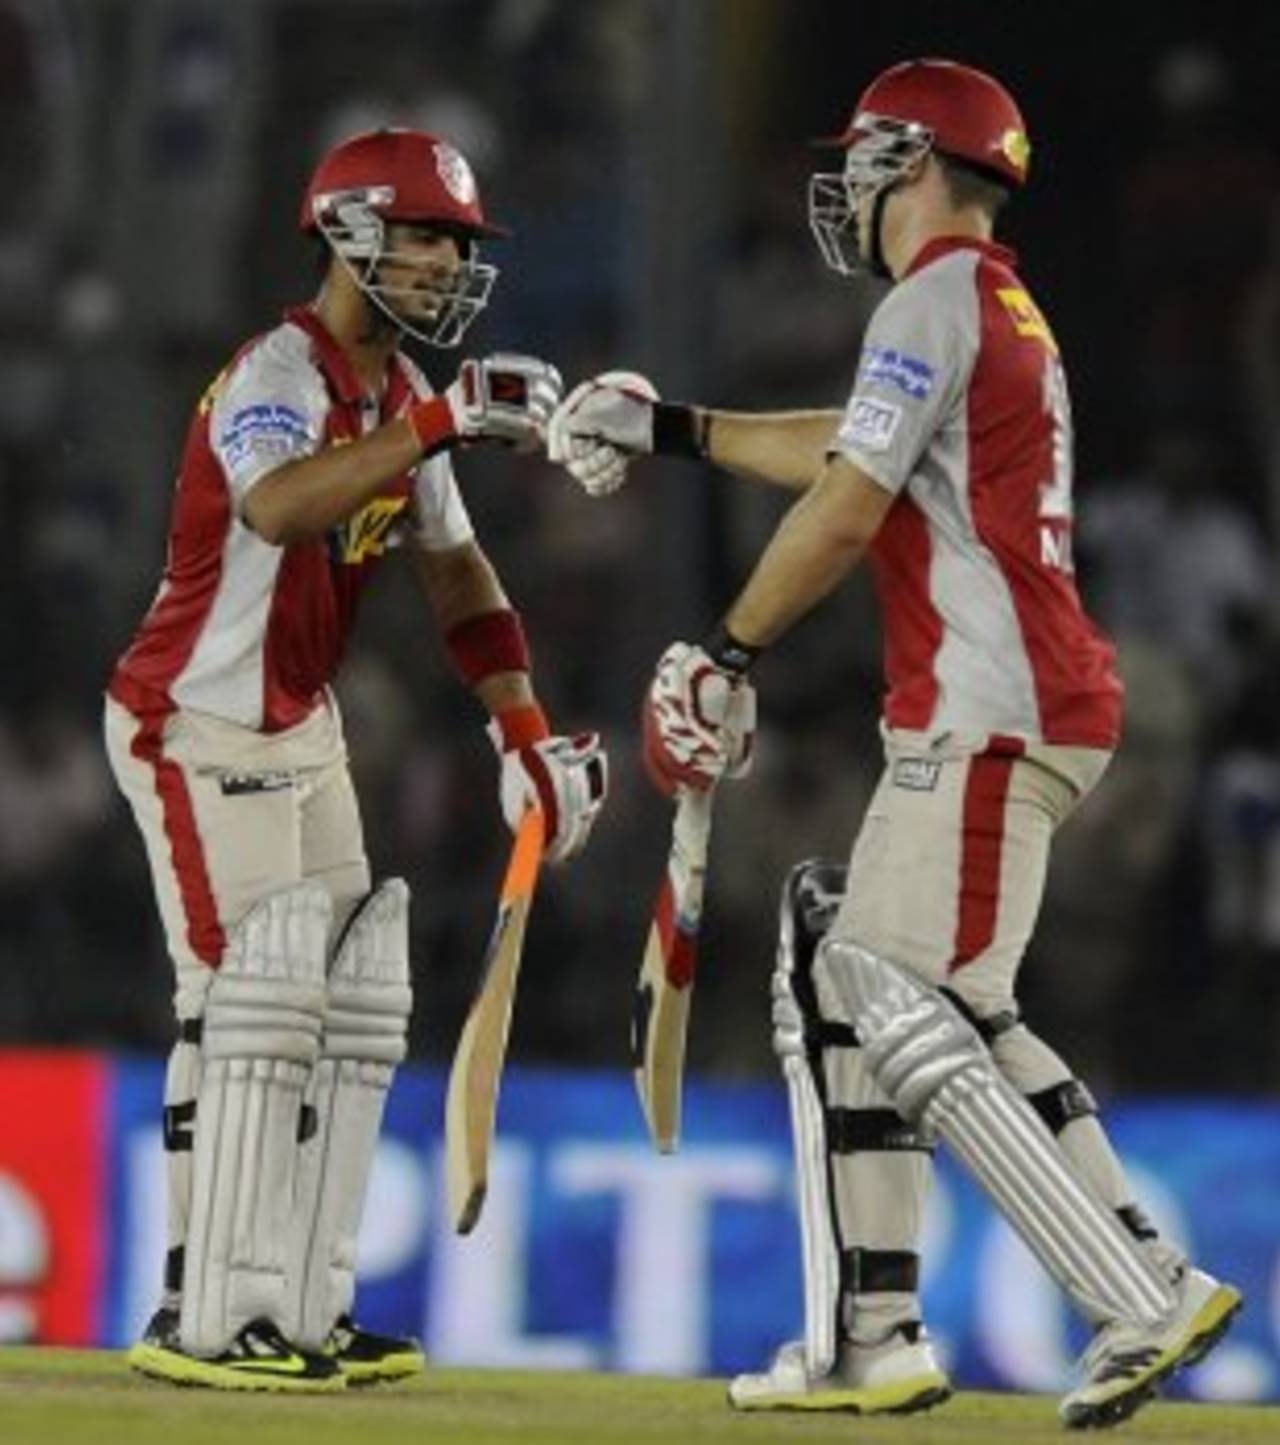 David Miller and Mandeep Singh added 128 for the fourth wicket, Kings XI Punjab v Pune Warriors, IPL, Mohali, April 21, 2013